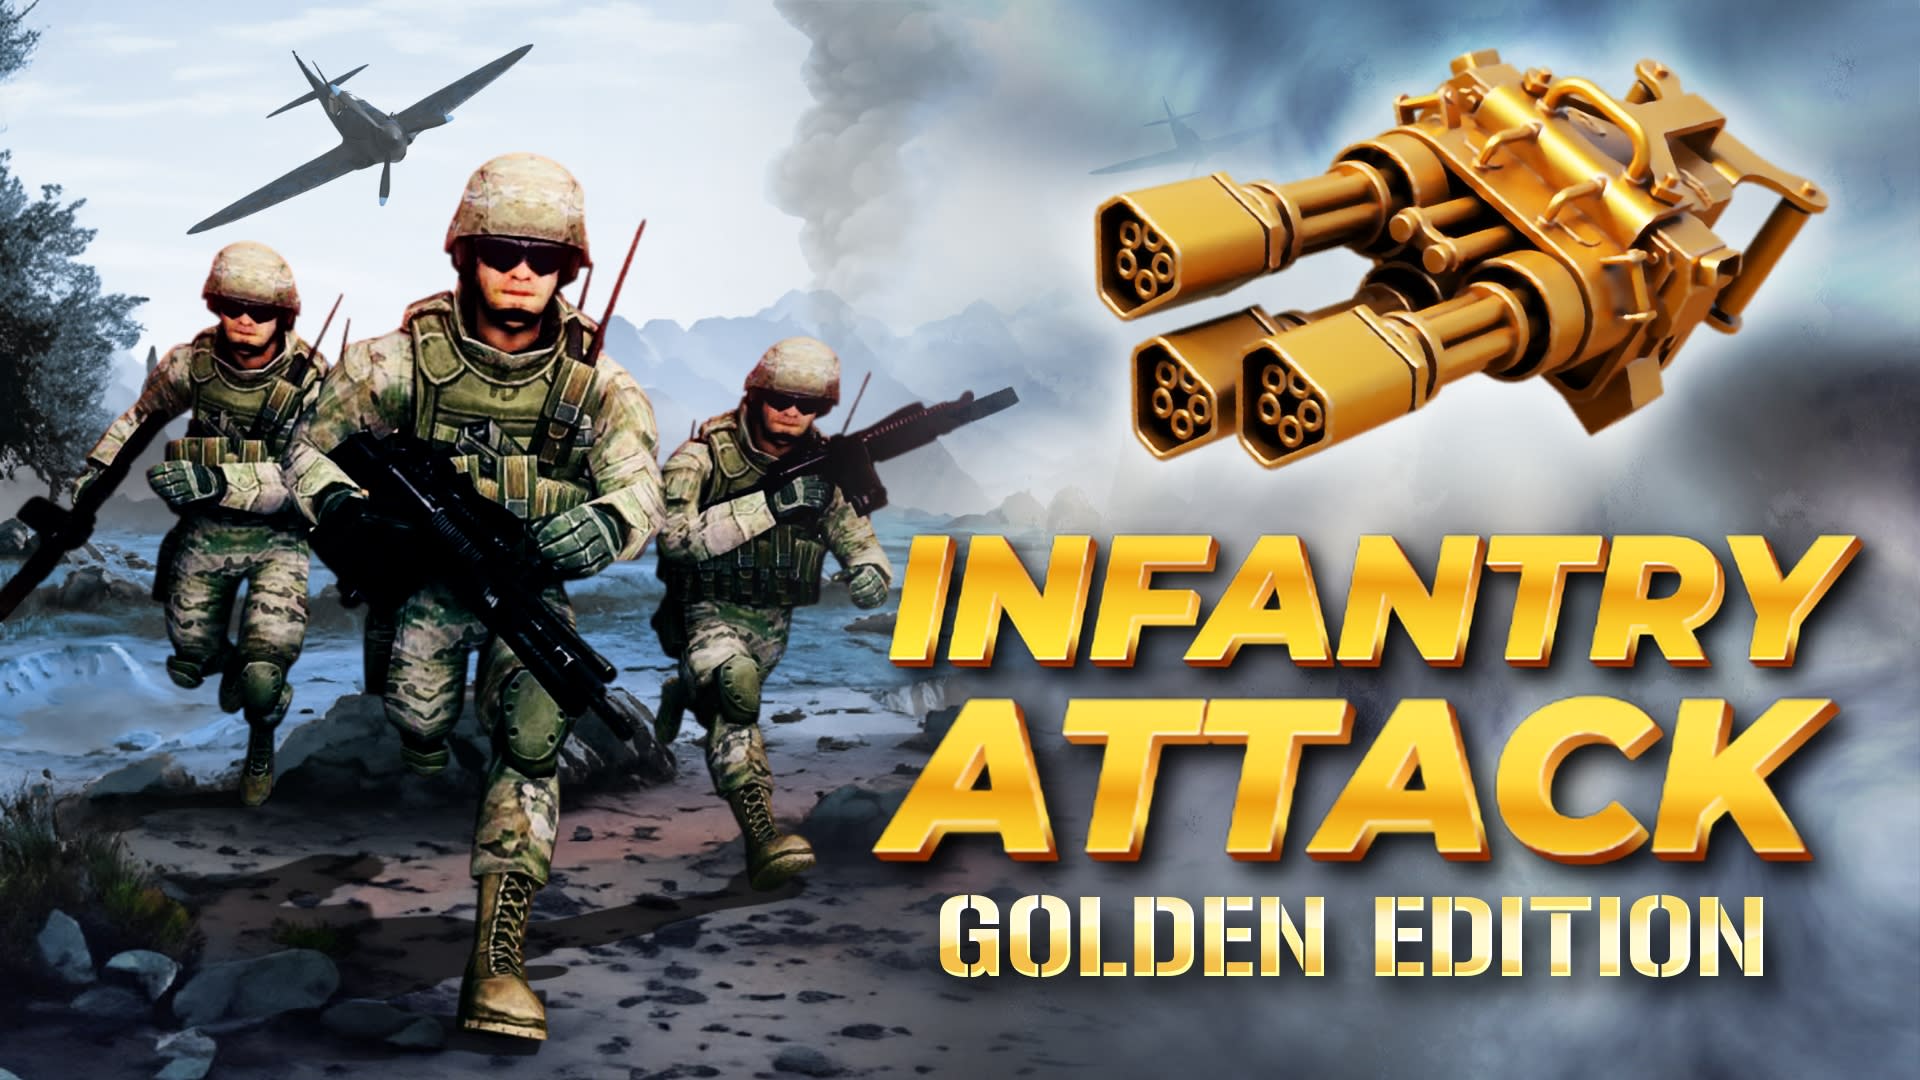 Infantry Attack: Golden Edition